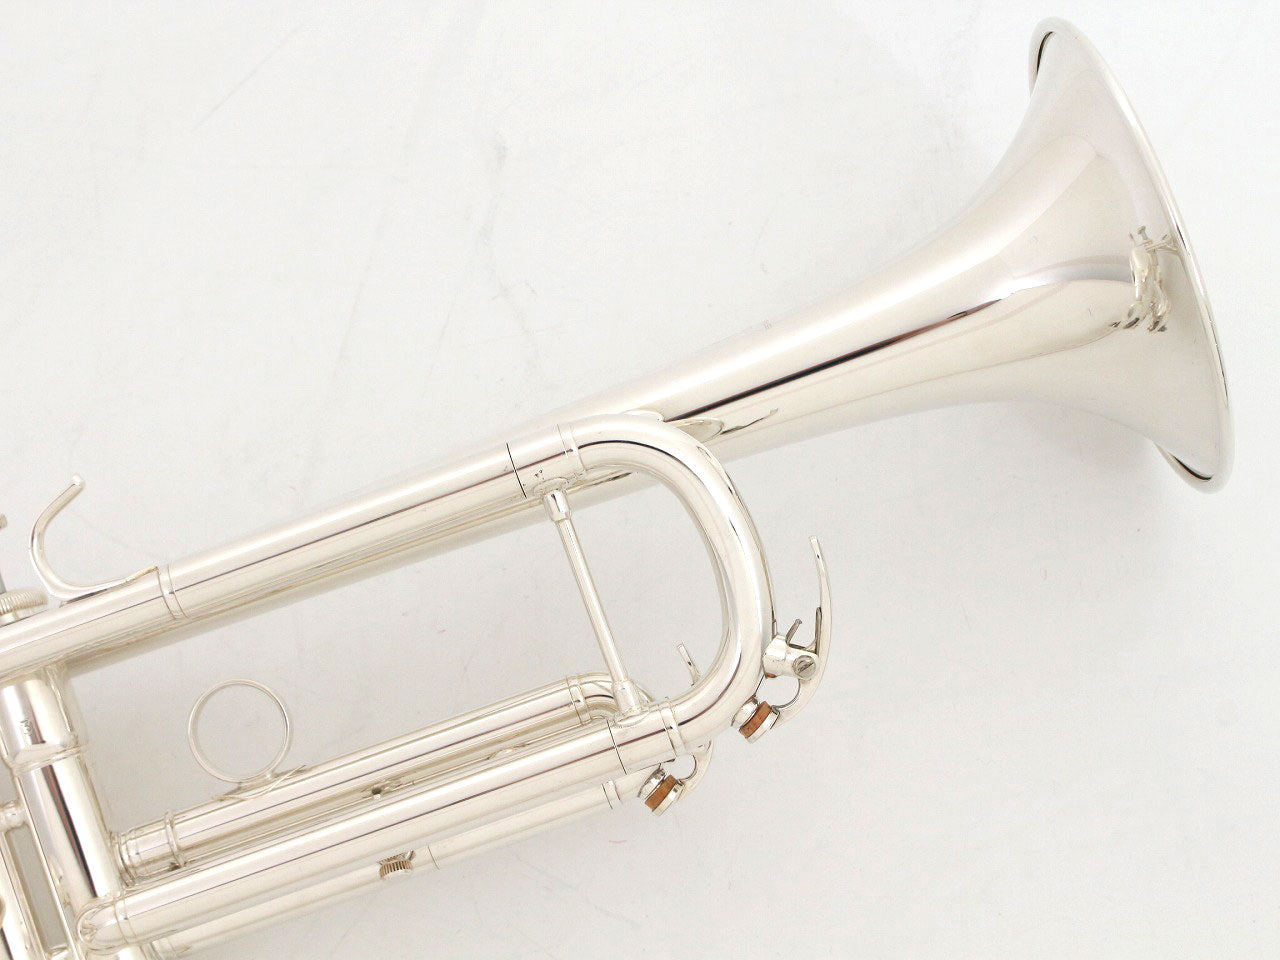 [SN D08638] USED YAMAHA / Trumpet YTR-4335GSII Made in Japan, silver plated finish [11]